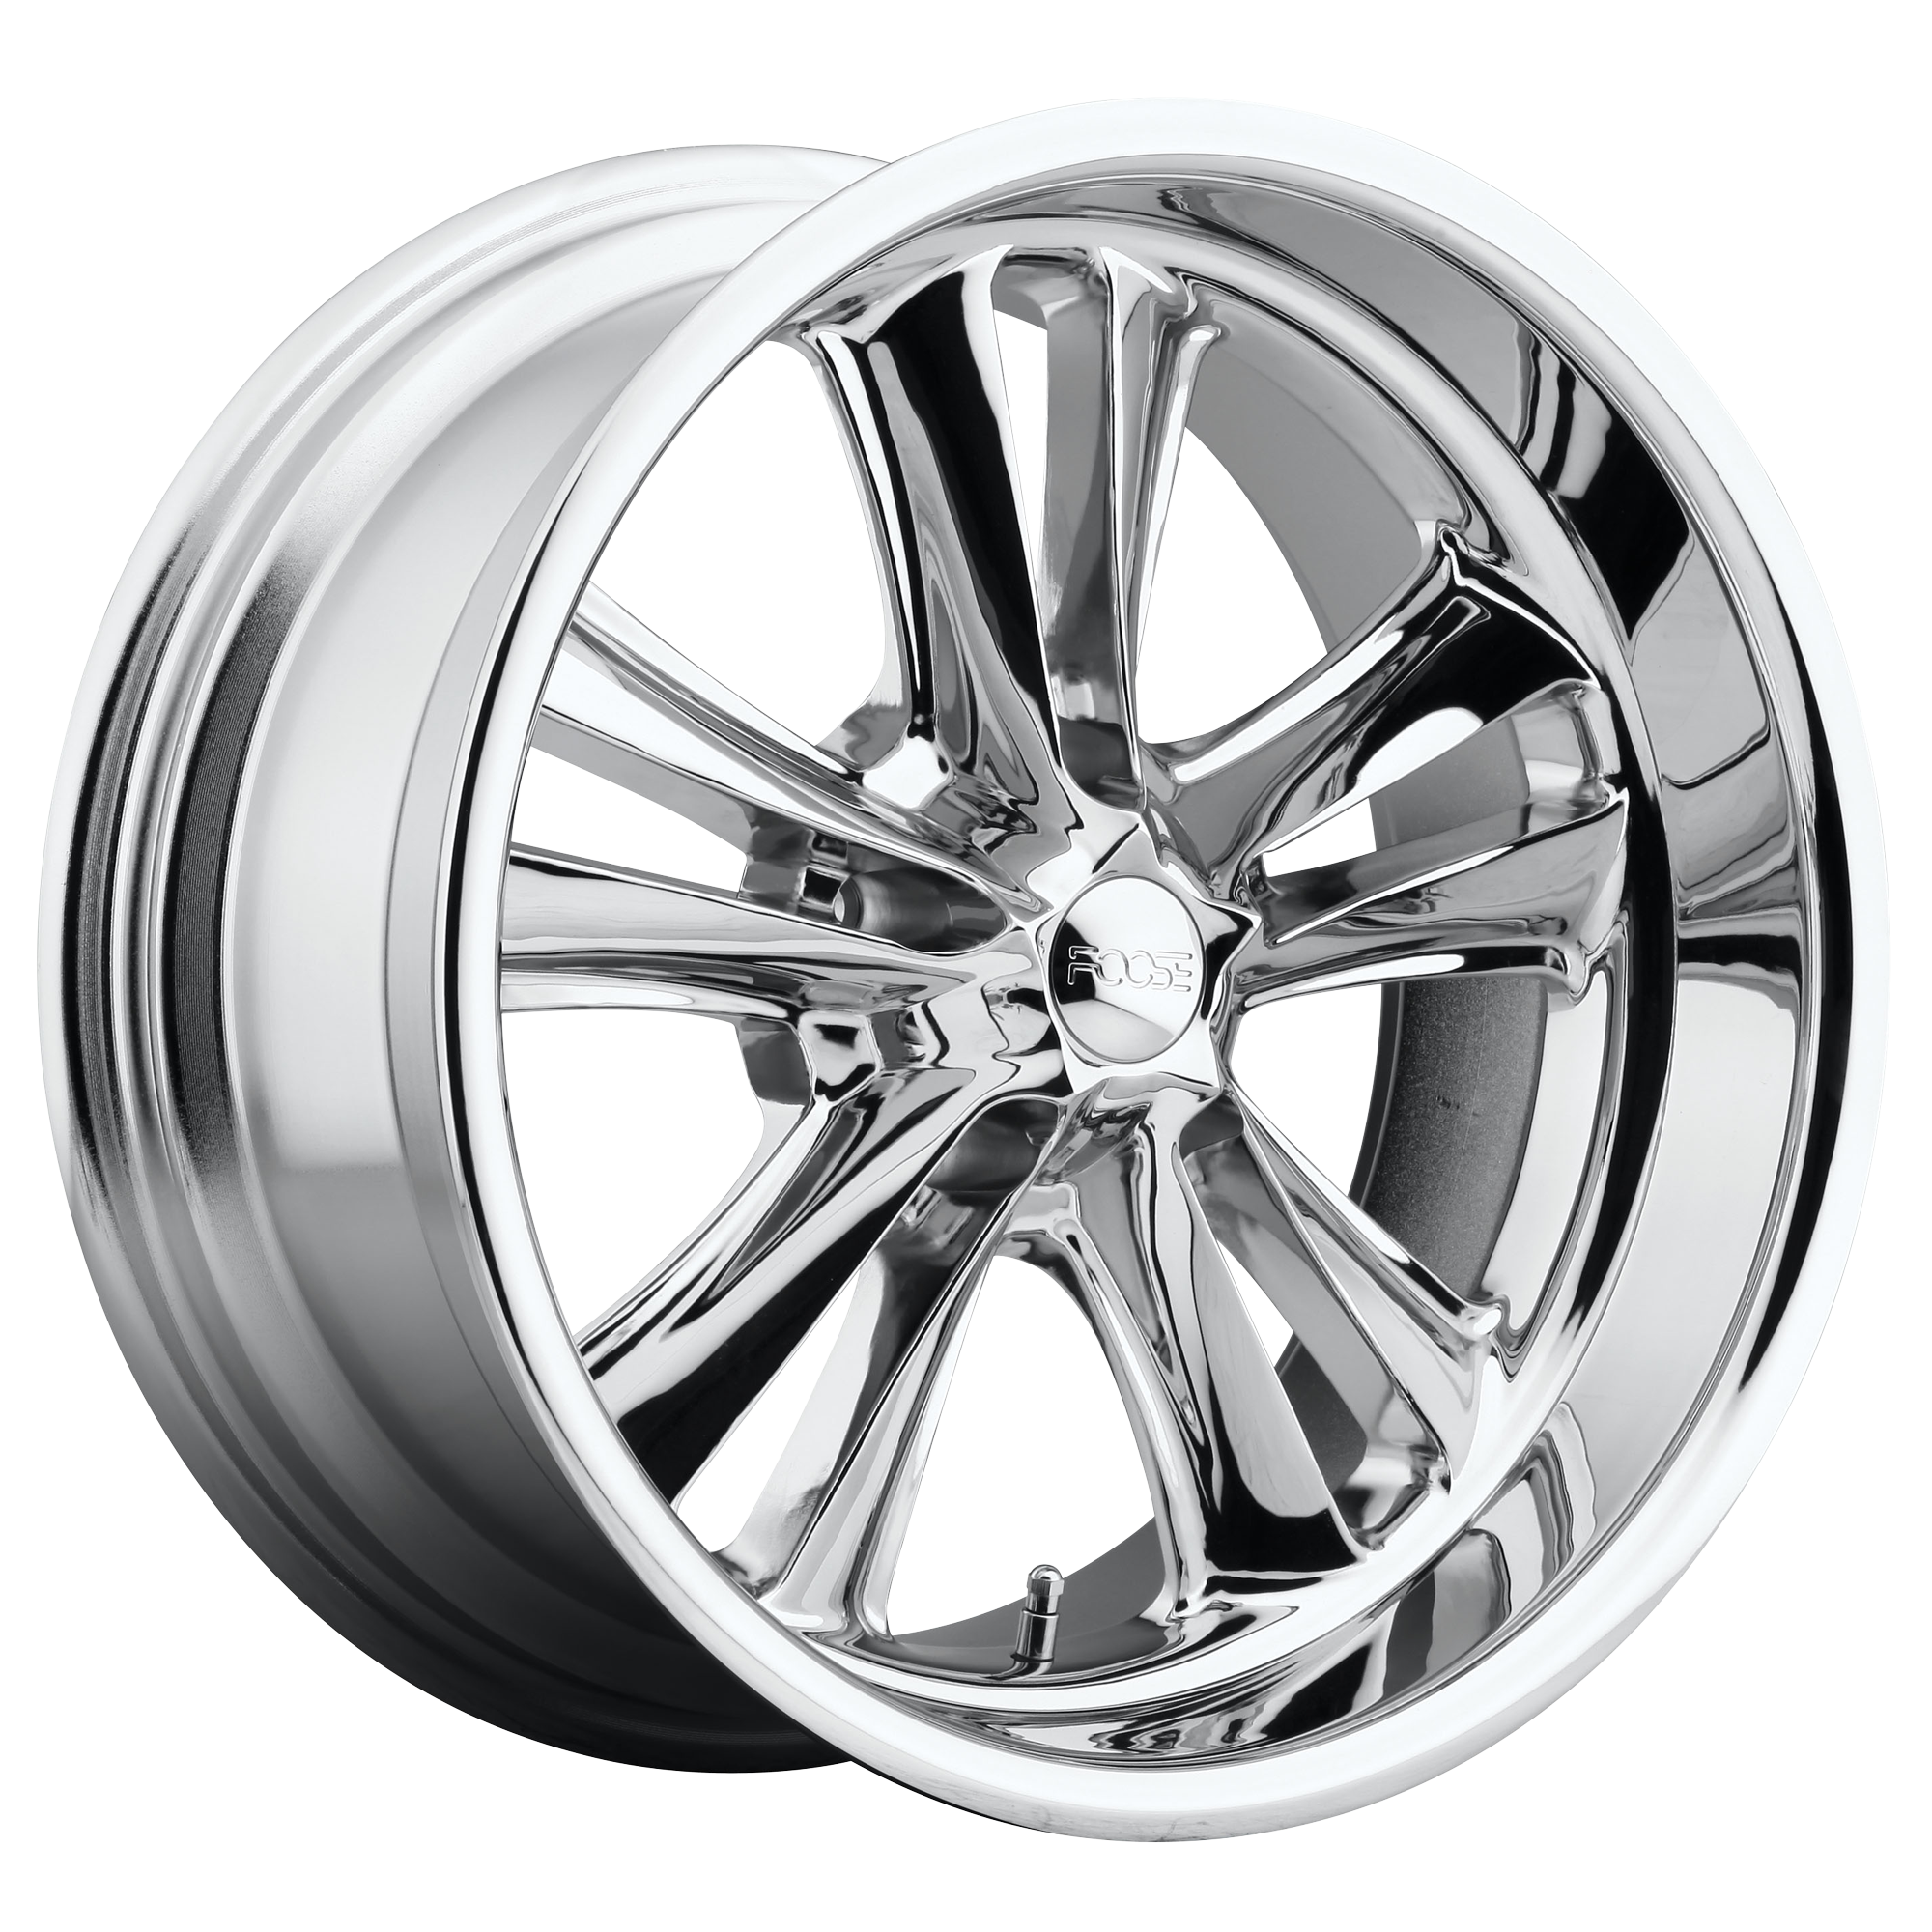 KNUCKLE 18x8 5x120.65 CHROME PLATED (1 mm) - Tires and Engine Performance